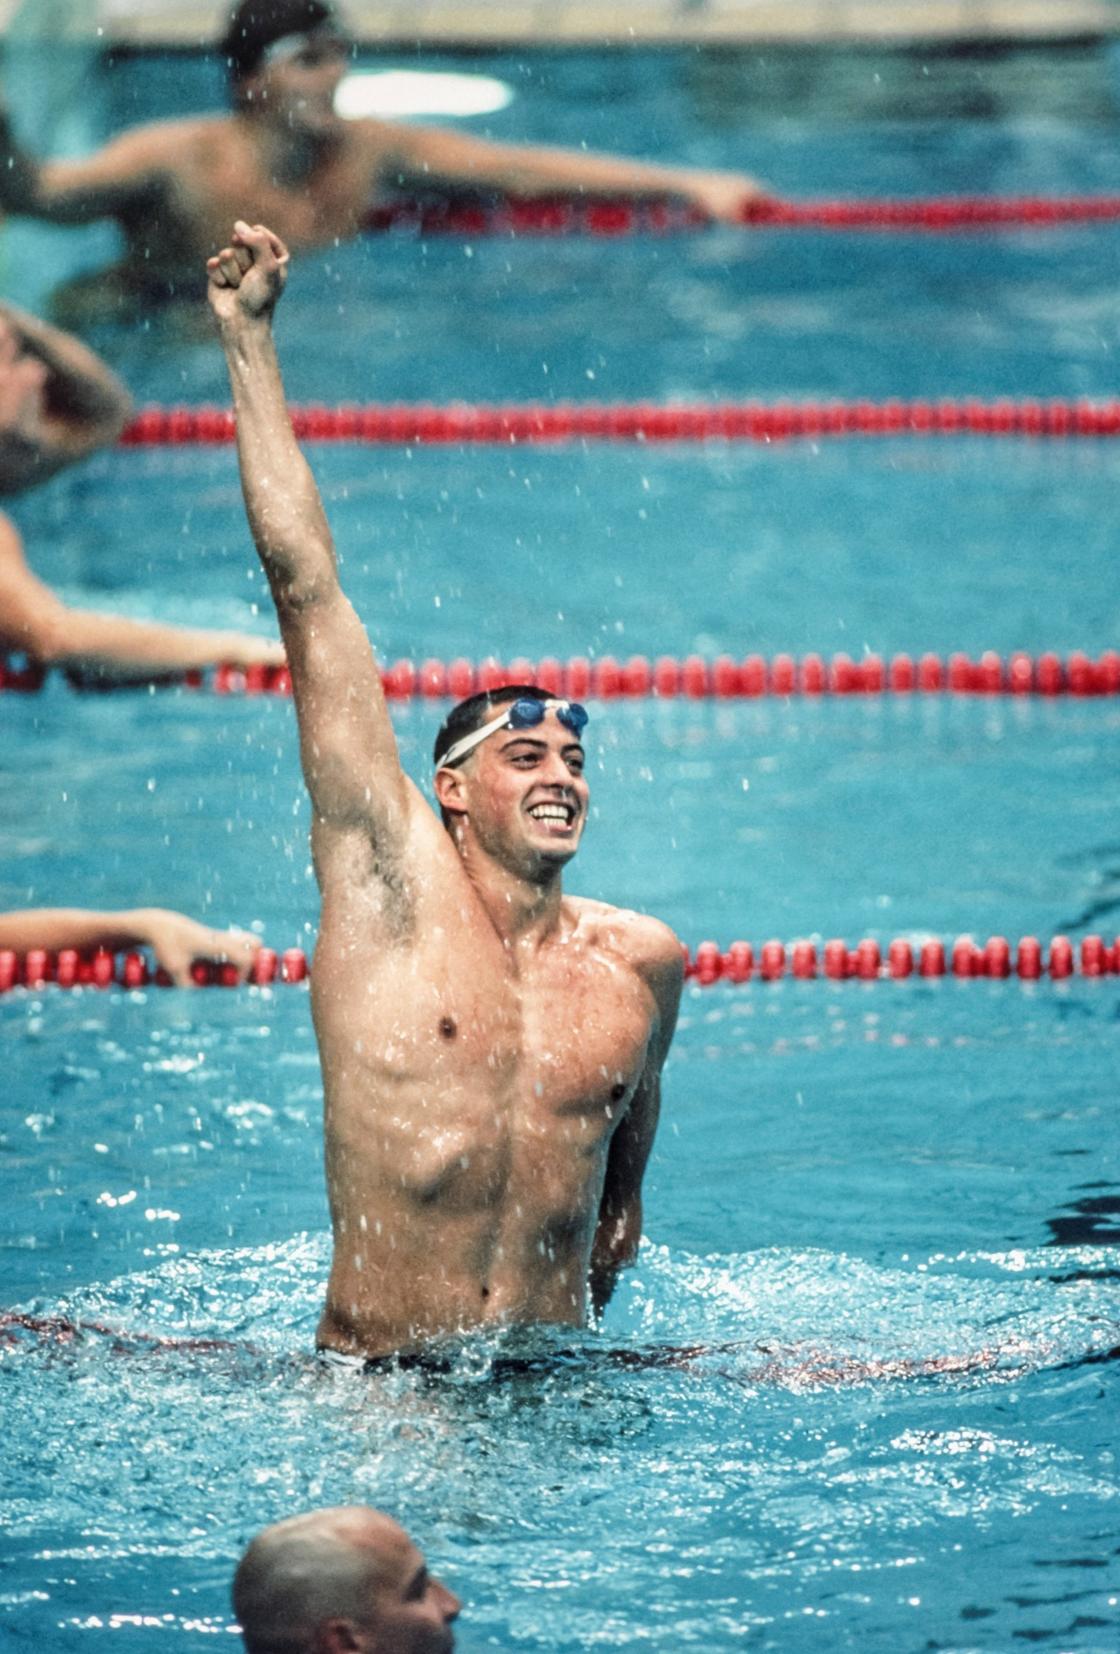 Greatest swimmer of all time: A ranked list of the best swimmers ever